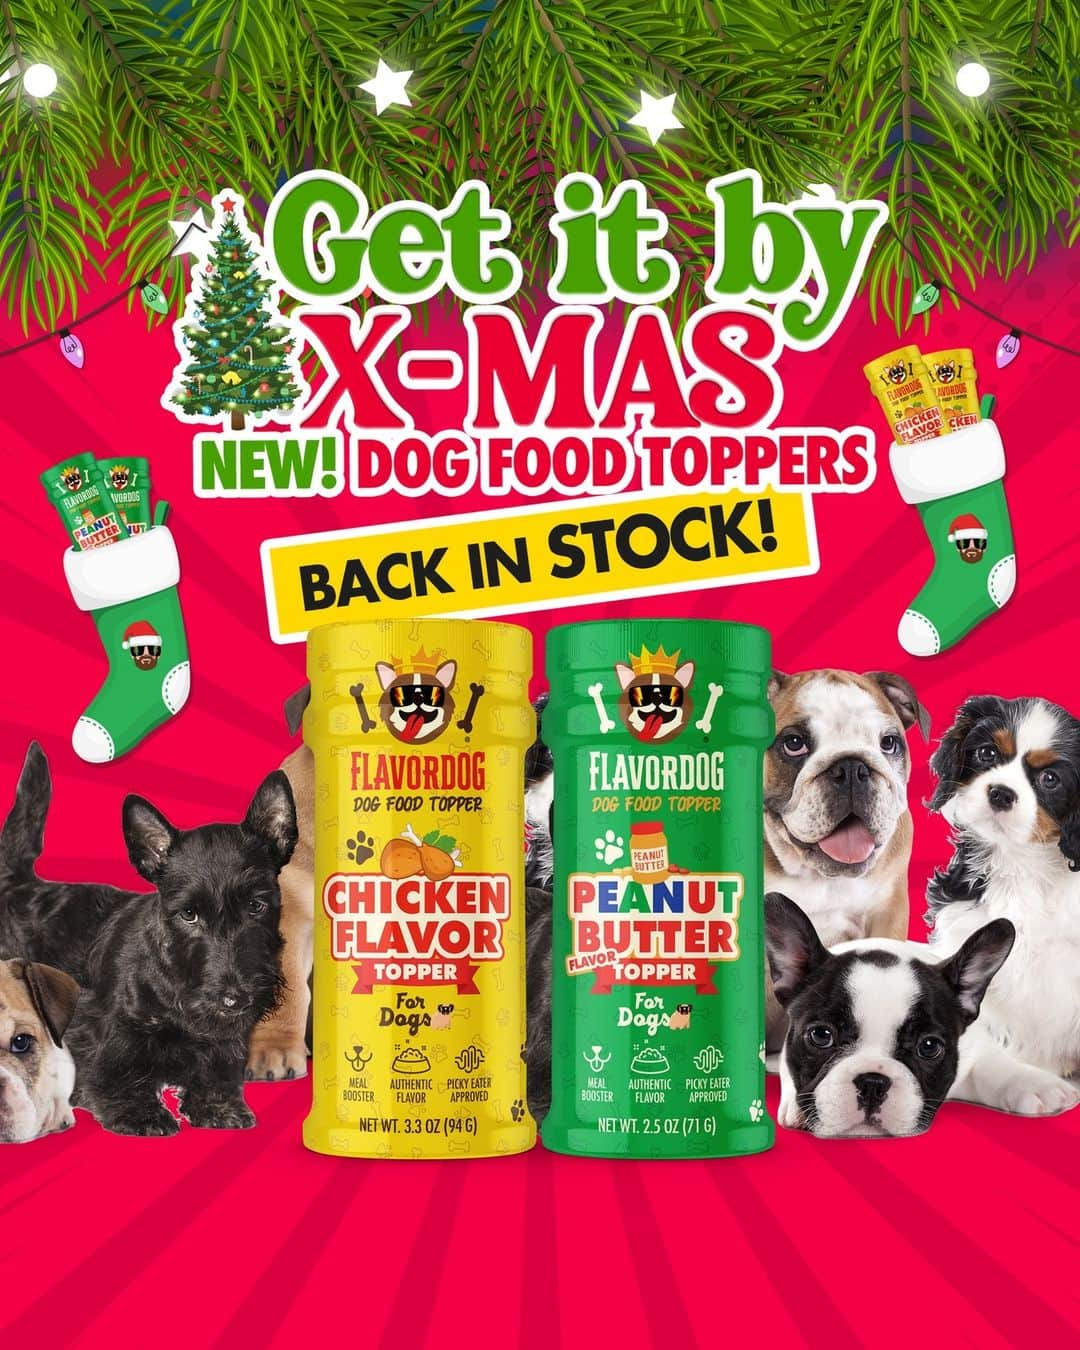 Flavorgod Seasoningsのインスタグラム：「🎅❗Get it before Christmas! Back in STOCK! Flavorgod Dog Toppers are the perfect Christmas present for your dog and add flavor to their meals! 🎁❗Shop Now!!⁠ Click link in the bio -> @flavorgod | www.flavorgod.com⁠🎄🎅⁠ -⁠ Flavor God Seasonings are:⁠ 🎅ZERO CALORIES PER SERVING⁠ 🎄MADE FRESH⁠ 🎅MADE LOCALLY IN US⁠ 🎄FREE GIFTS AT CHECKOUT⁠ 🎅GLUTEN FREE⁠ 🎄#PALEO & #KETO FRIENDLY⁠ -⁠ #food #foodie #flavorgod #seasonings #glutenfree #mealprep #seasonings #breakfast #lunch #dinner #yummy #delicious #foodporn」